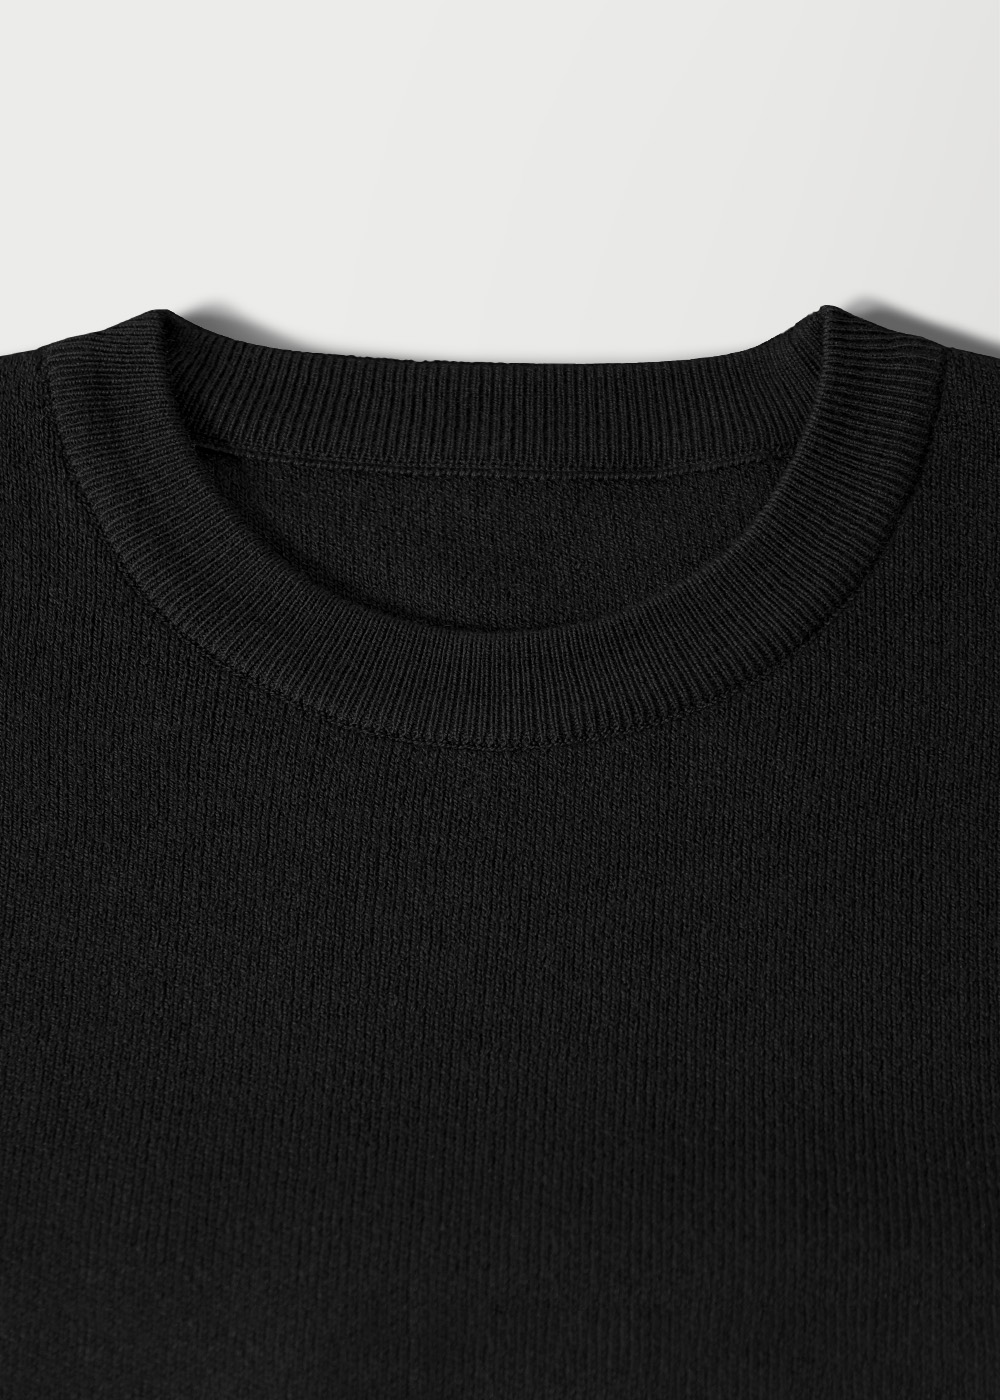 Wool Blended Casual Crewneck Knit _ black